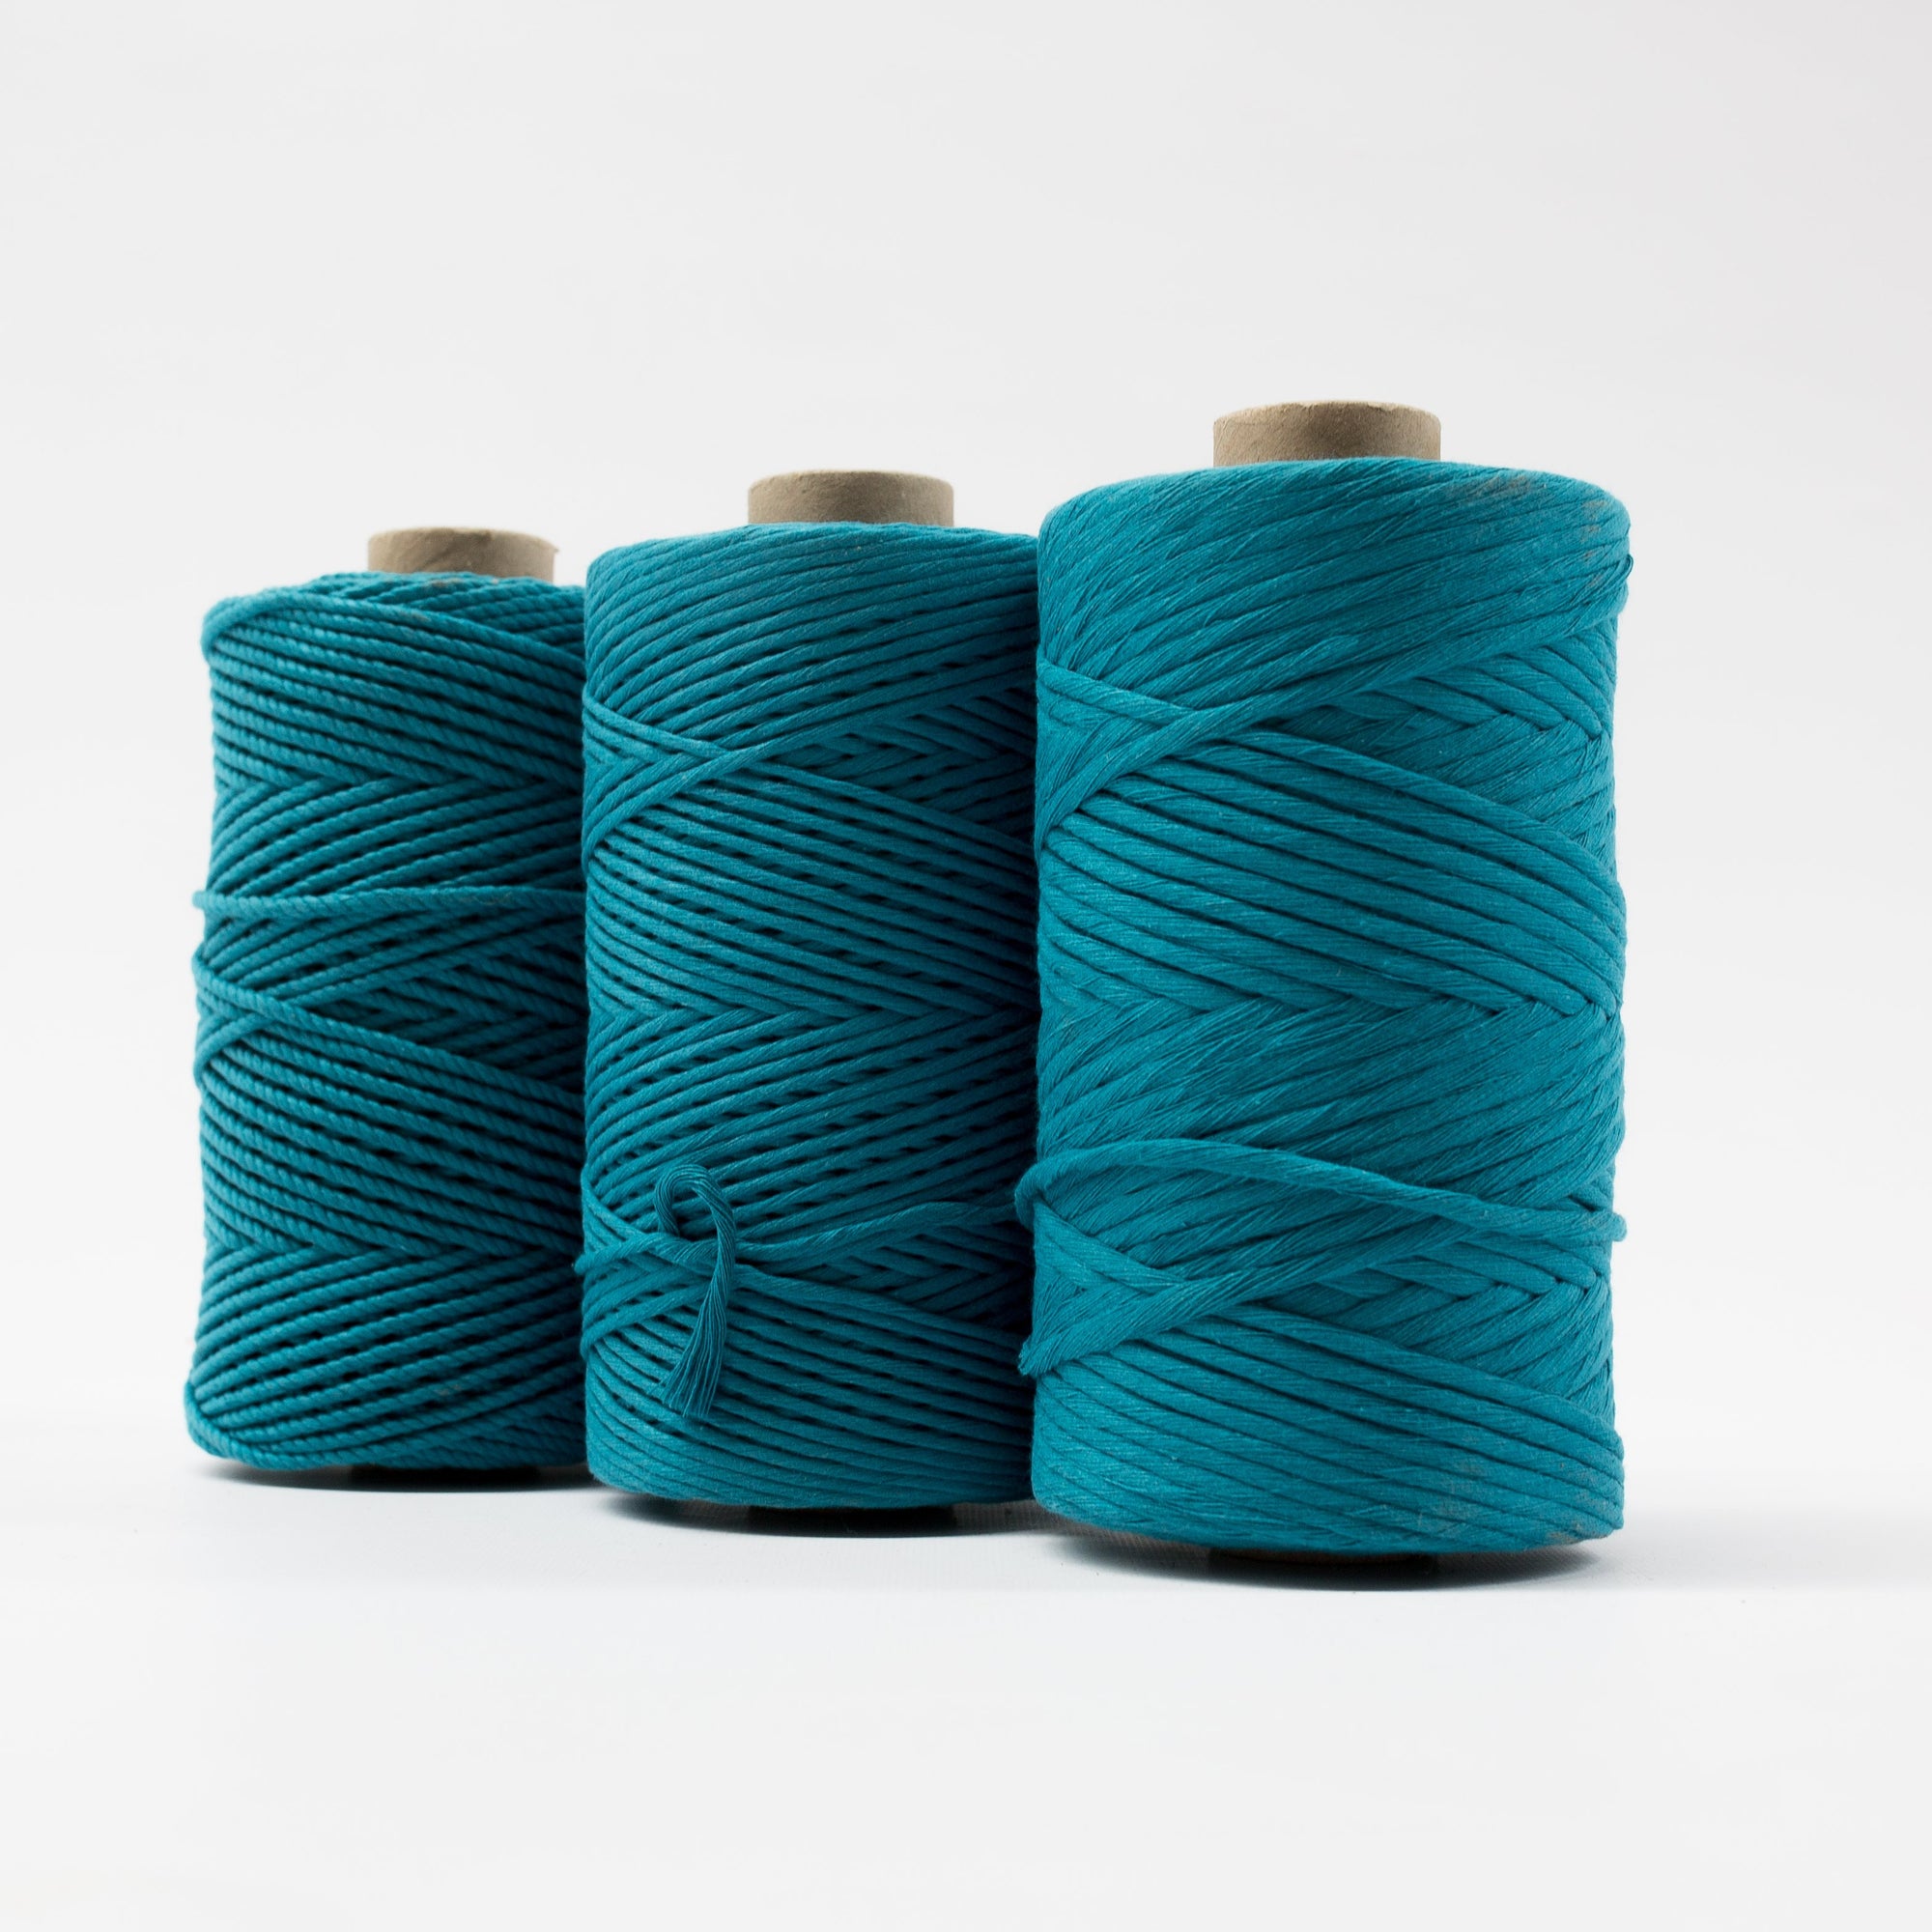 Mary Maker Studio Luxe Colour Cotton 4mm 1KG Recycled Luxe Macrame Rope // Rockpool Blue macrame cotton macrame rope macrame workshop macrame patterns macrame